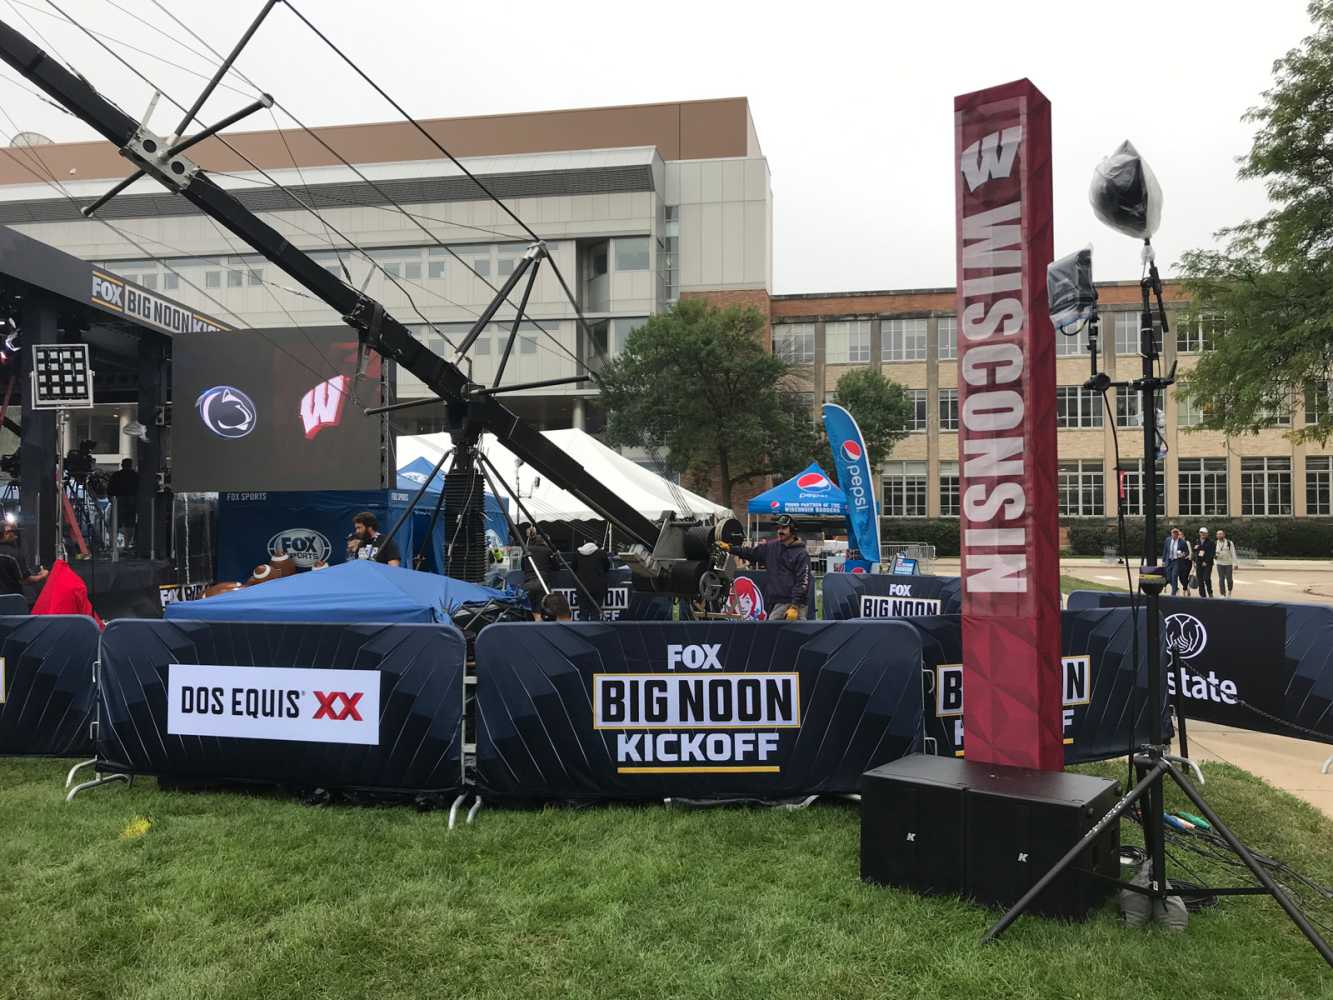 K-array’s broadcast solutions helped elevate the visual and audio experience of FOX Sports' Big Noon Kick-Off events